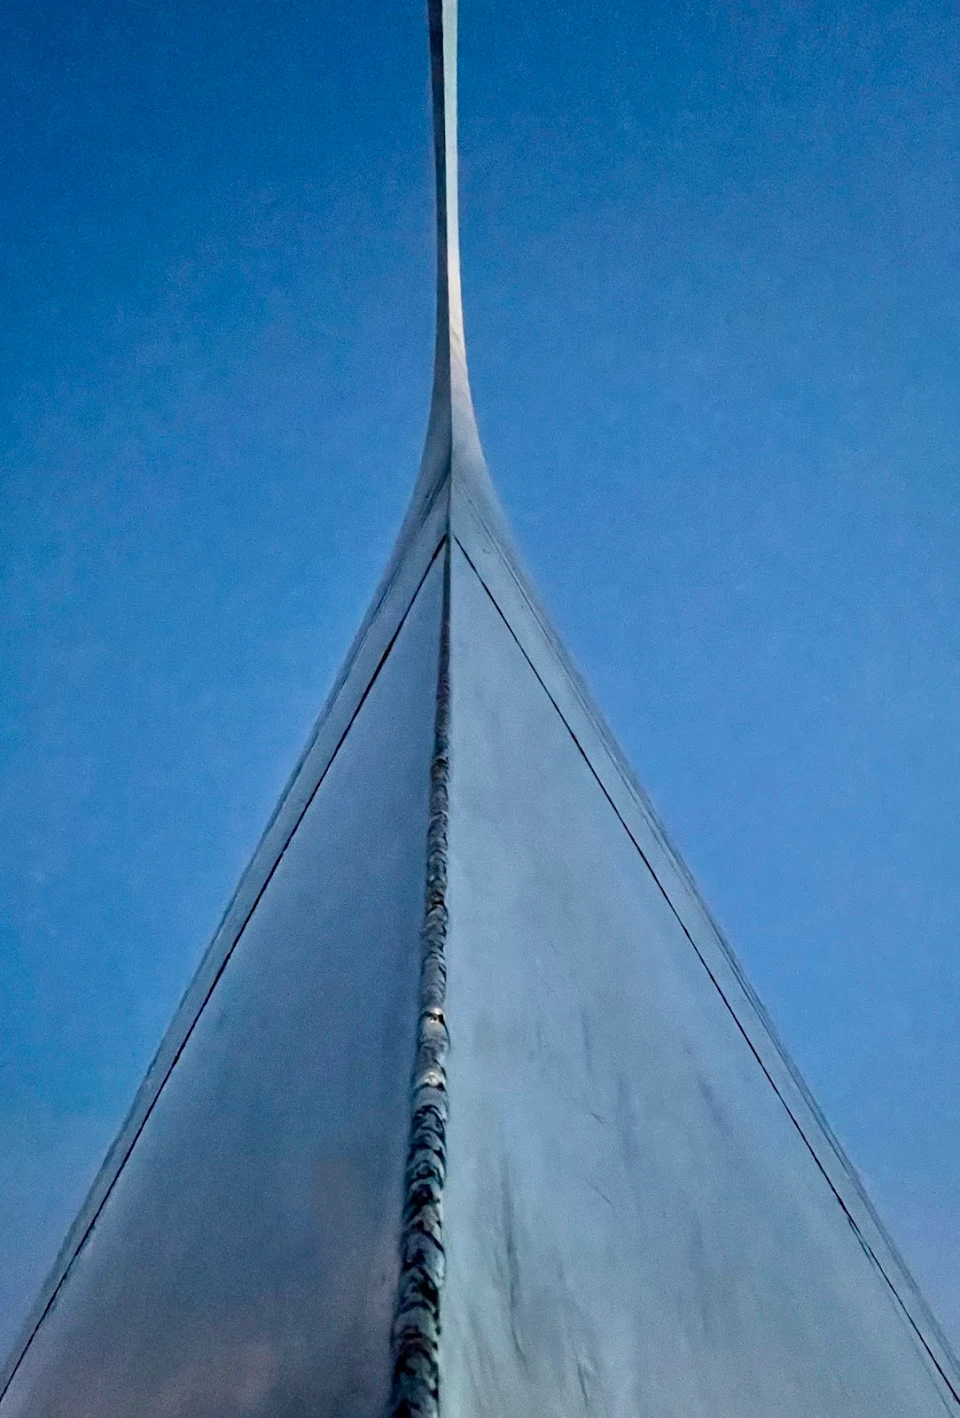 Looking straight up the weld on the underside of the Gateway Arch in St. Louis, Missouri [OC]